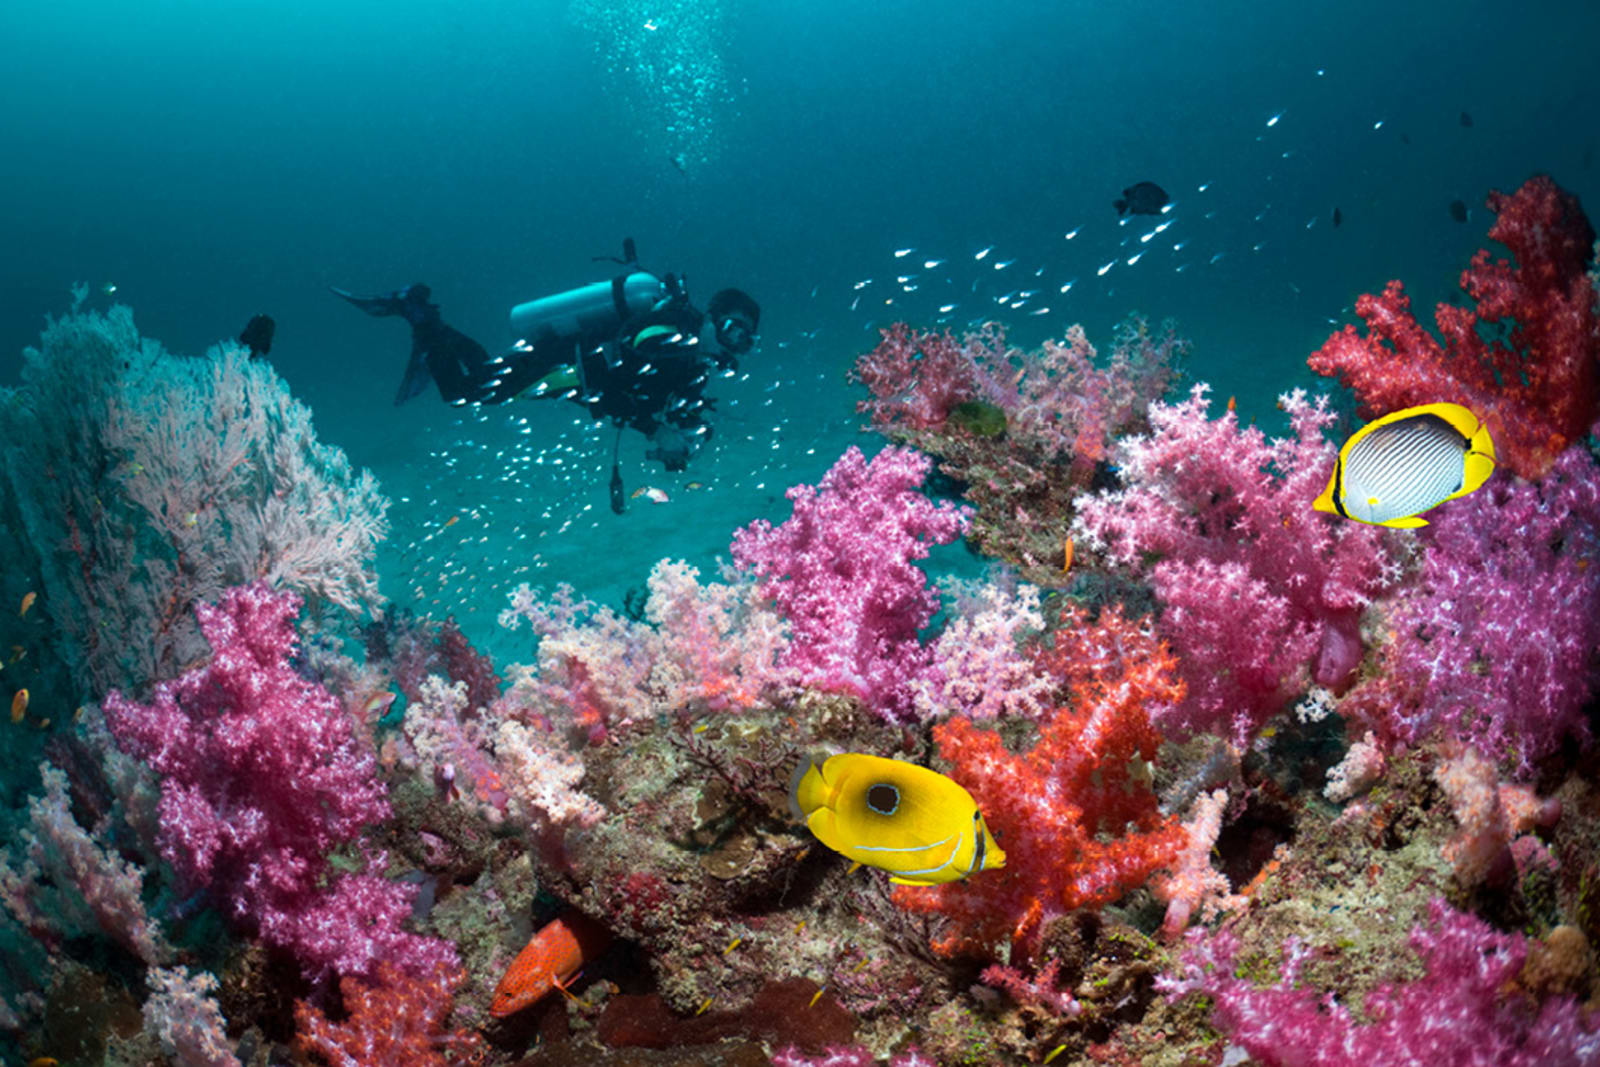 Scuba diver in the coral reefs surrounding Koh Tao